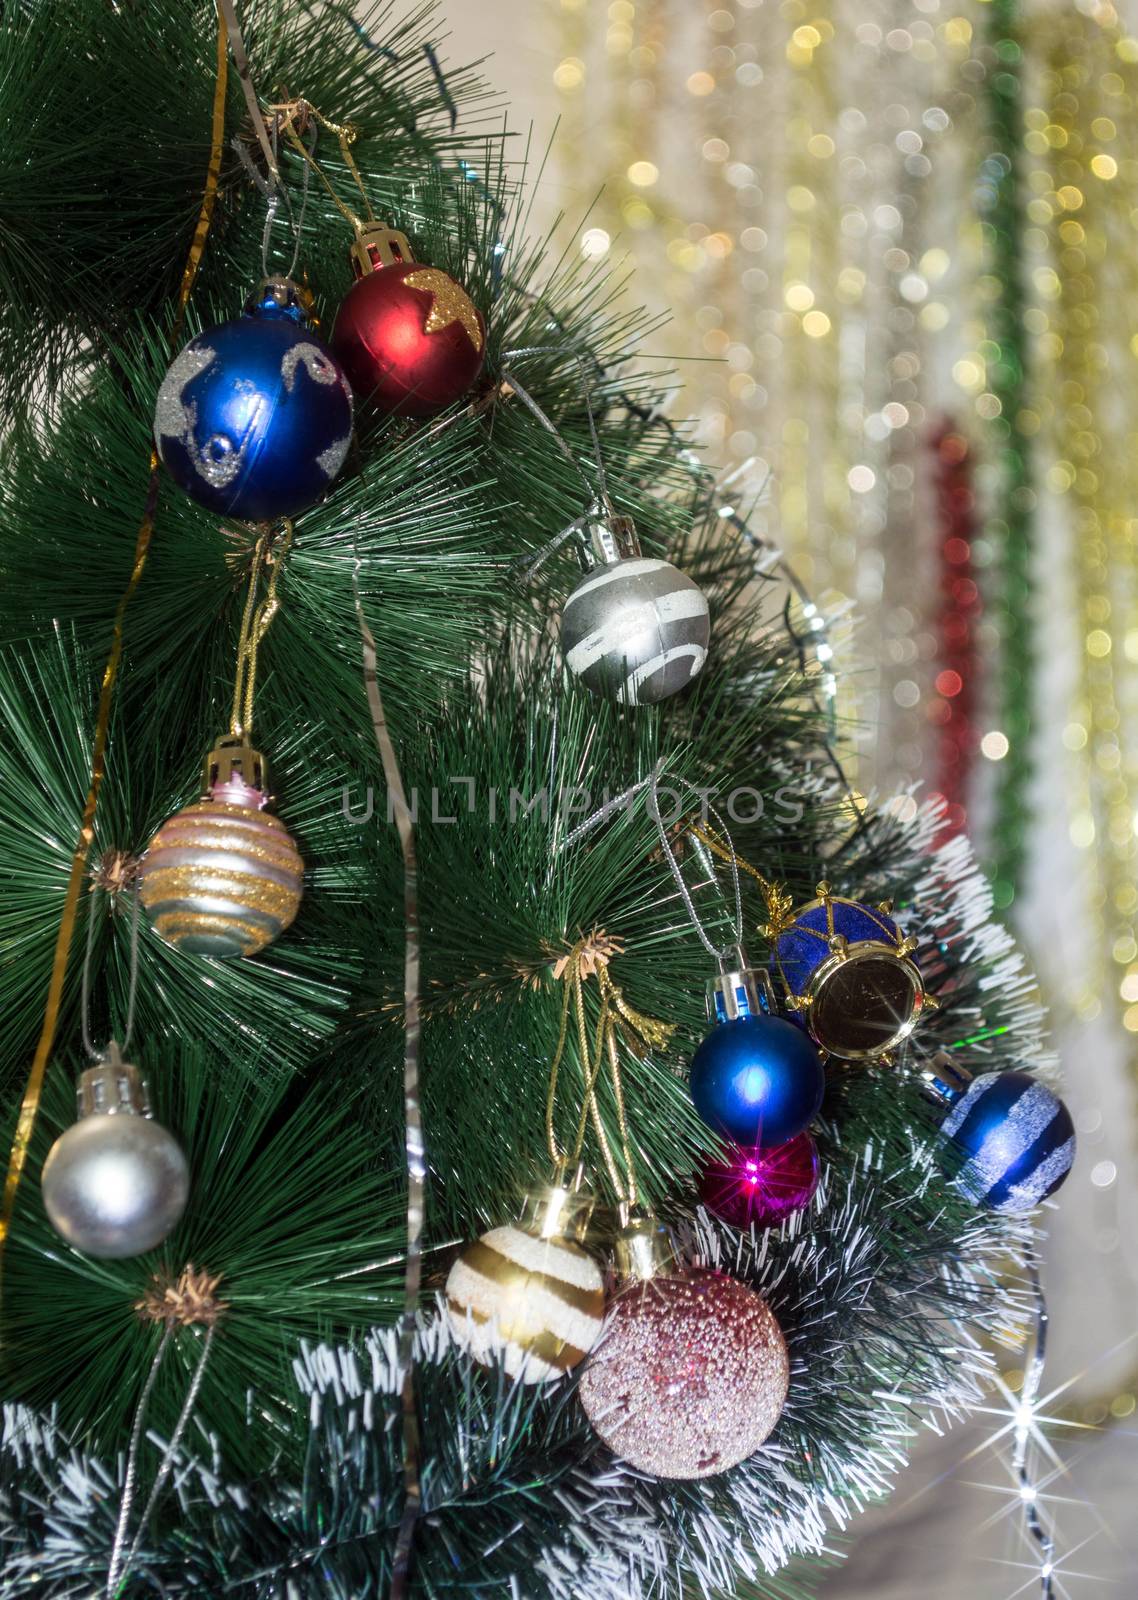 Christmas tree dressed differently colored toys